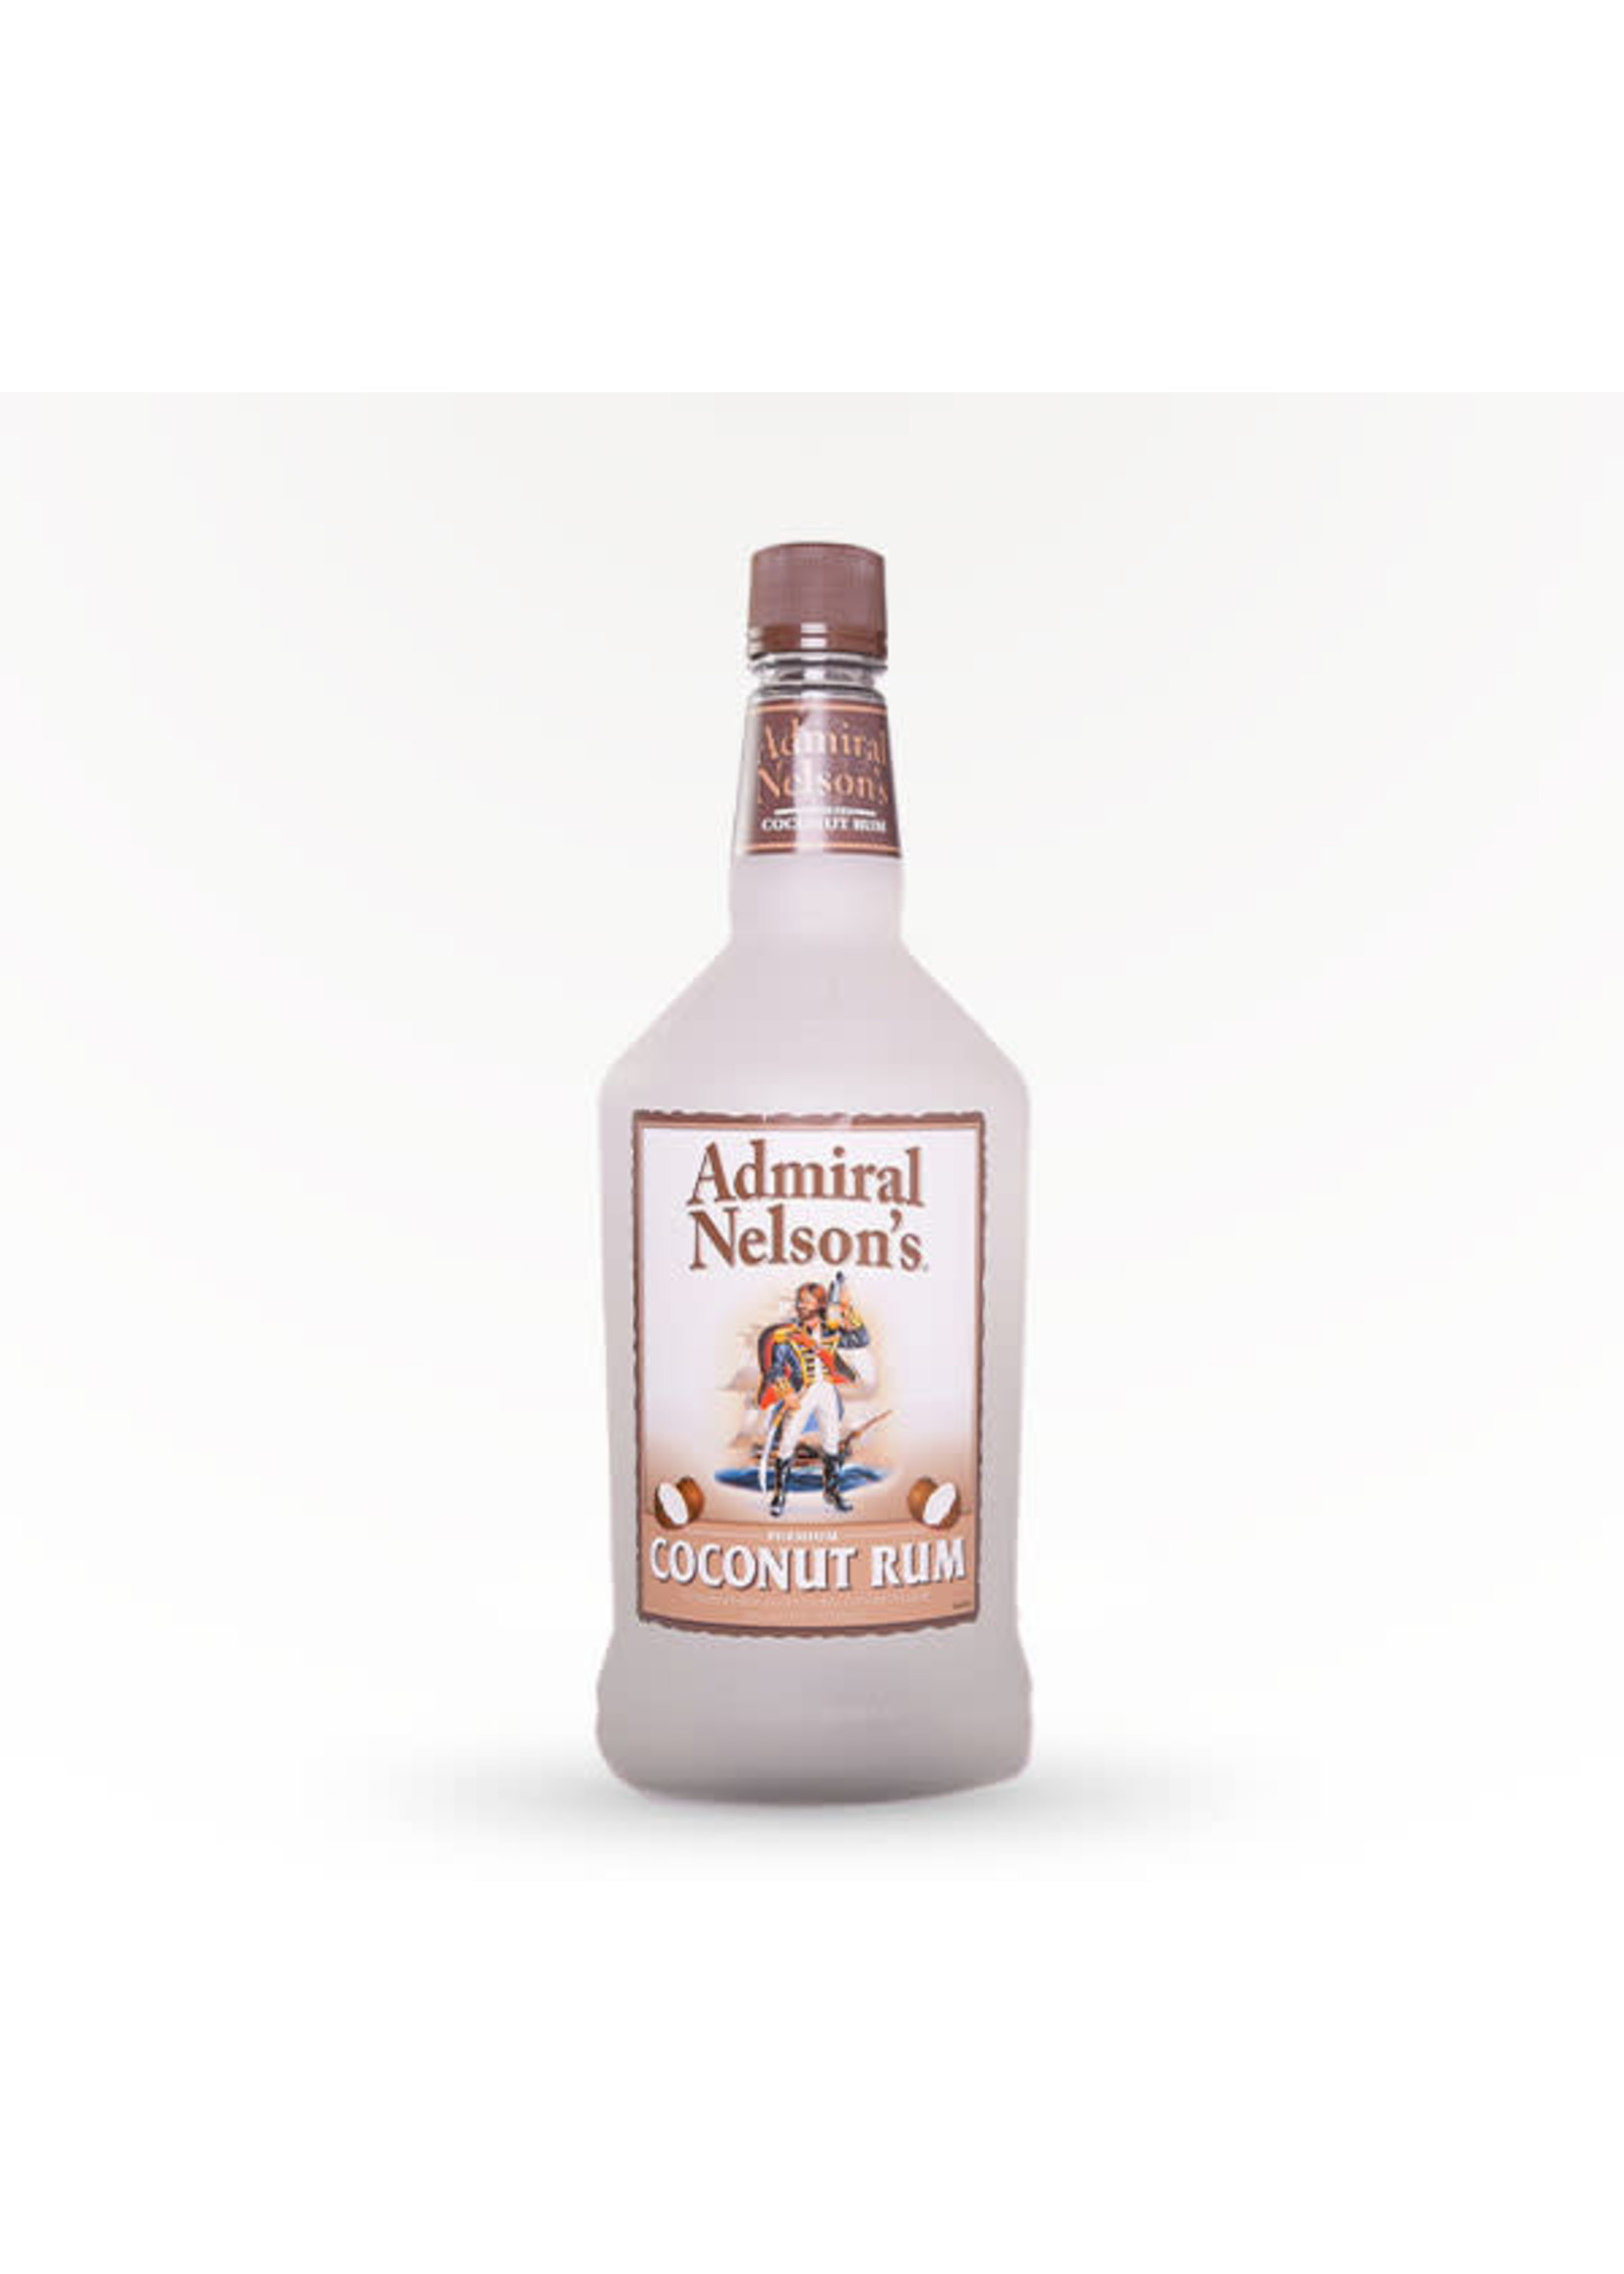 Admiral Nelson Admiral Nelsons Coconut Rum 42Proof Pet 1.75 Ltr